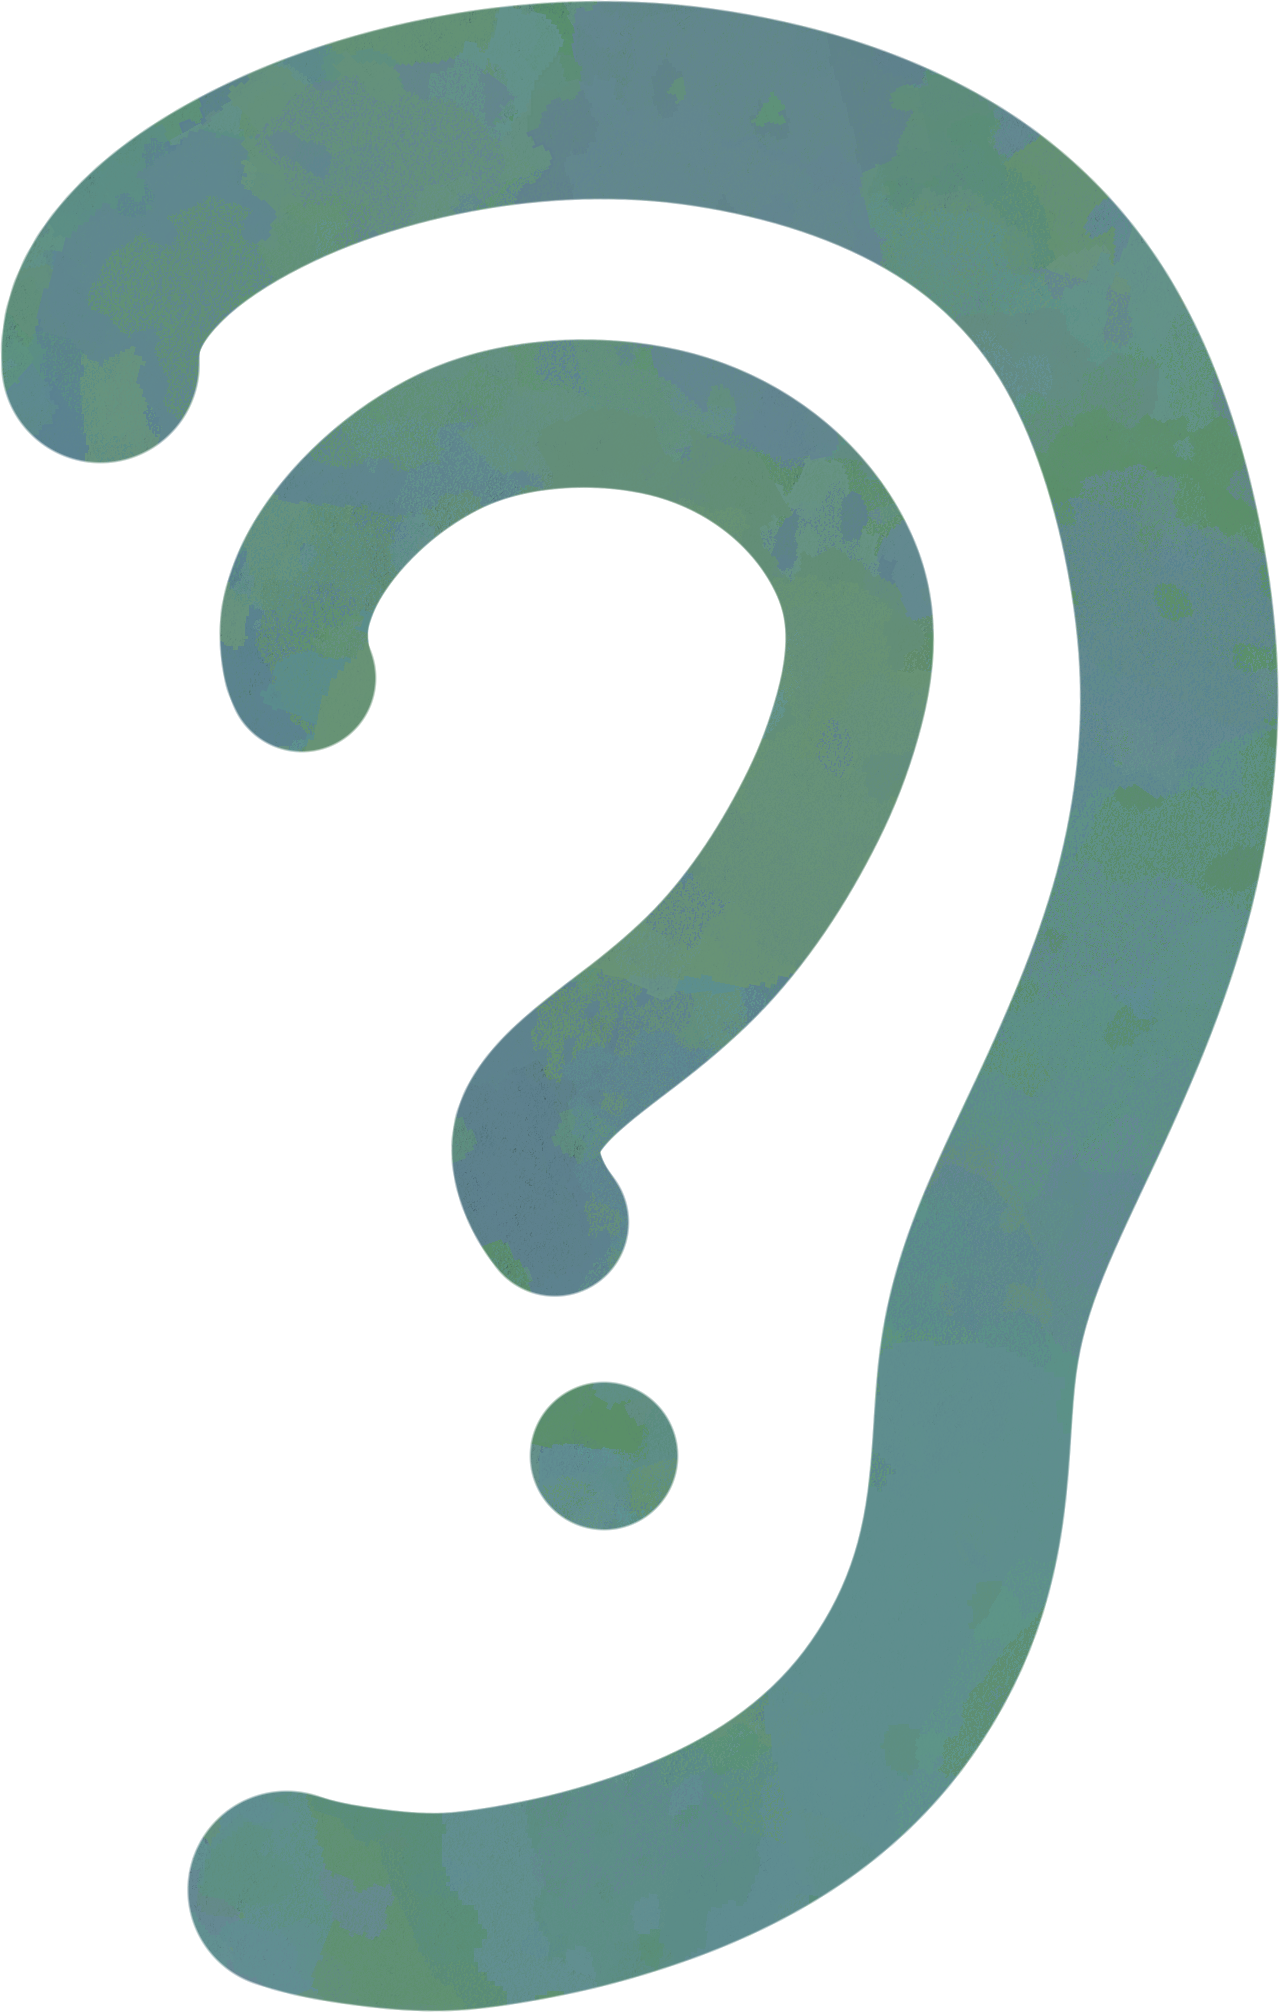 a green ear symbol with a question mark inside